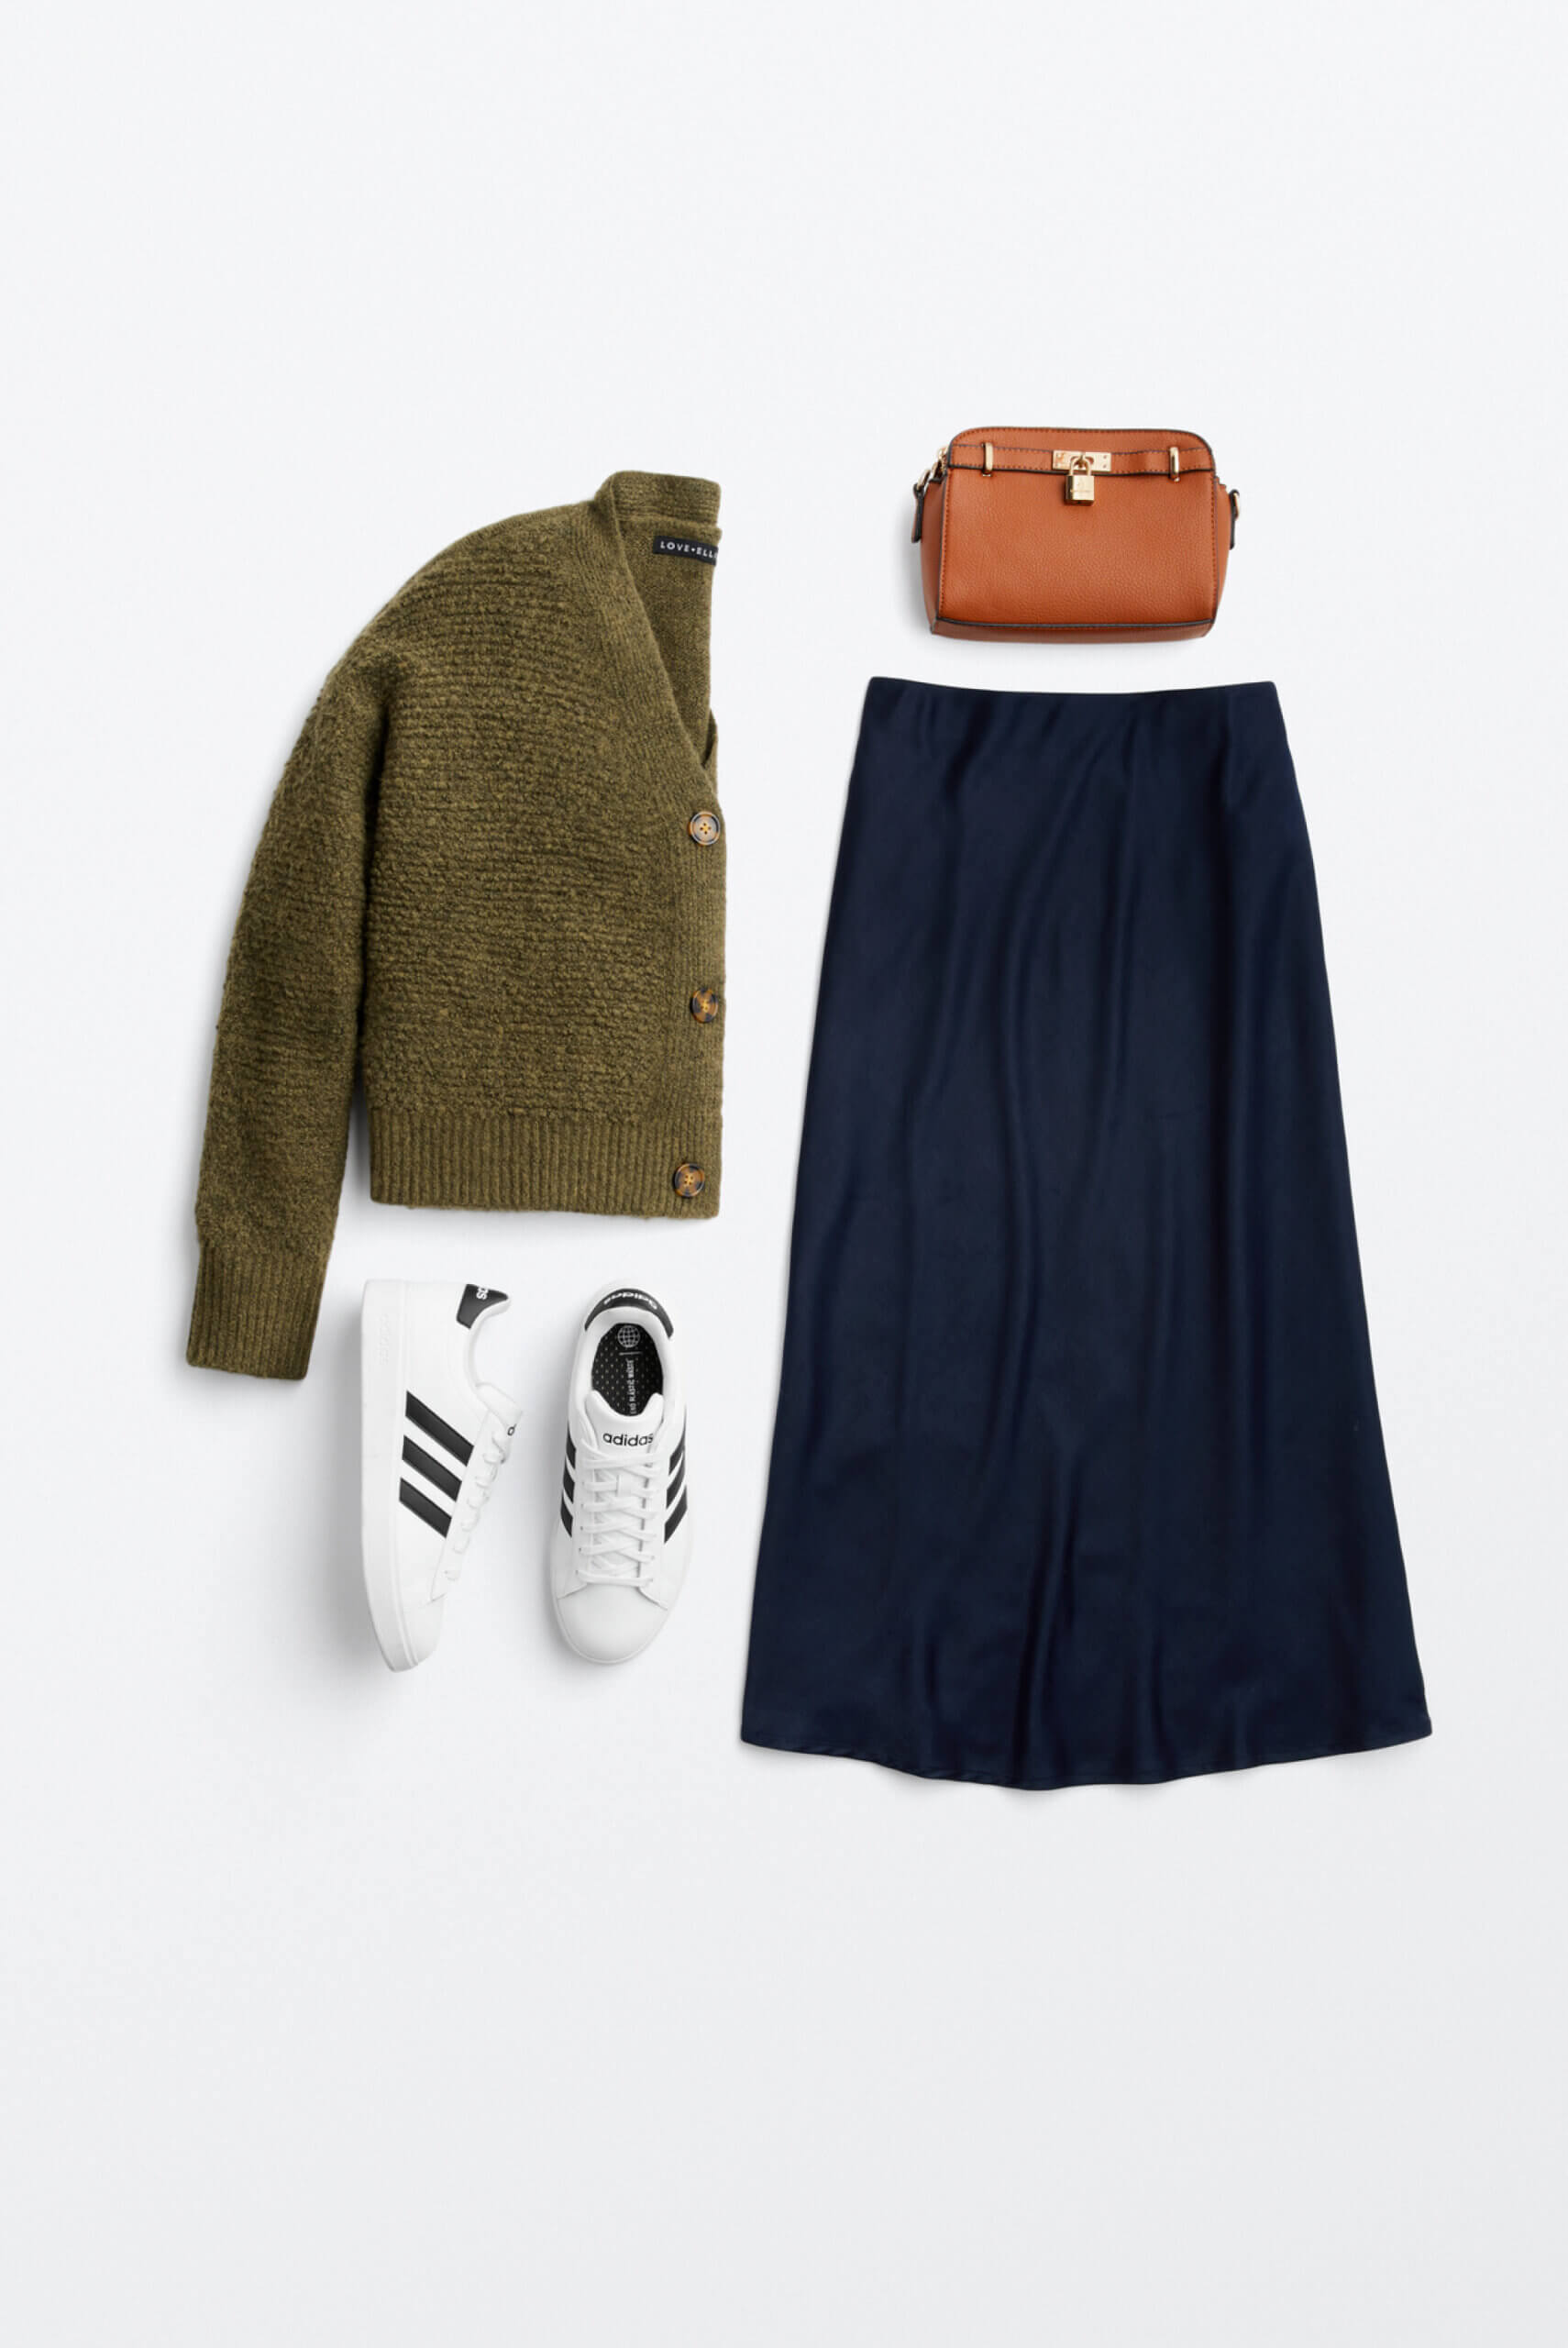 Alt text: A green cardigan, blue maxi skirt, brown clutch purse and white Adidas sneakers arranged together for outfit inspiration. 